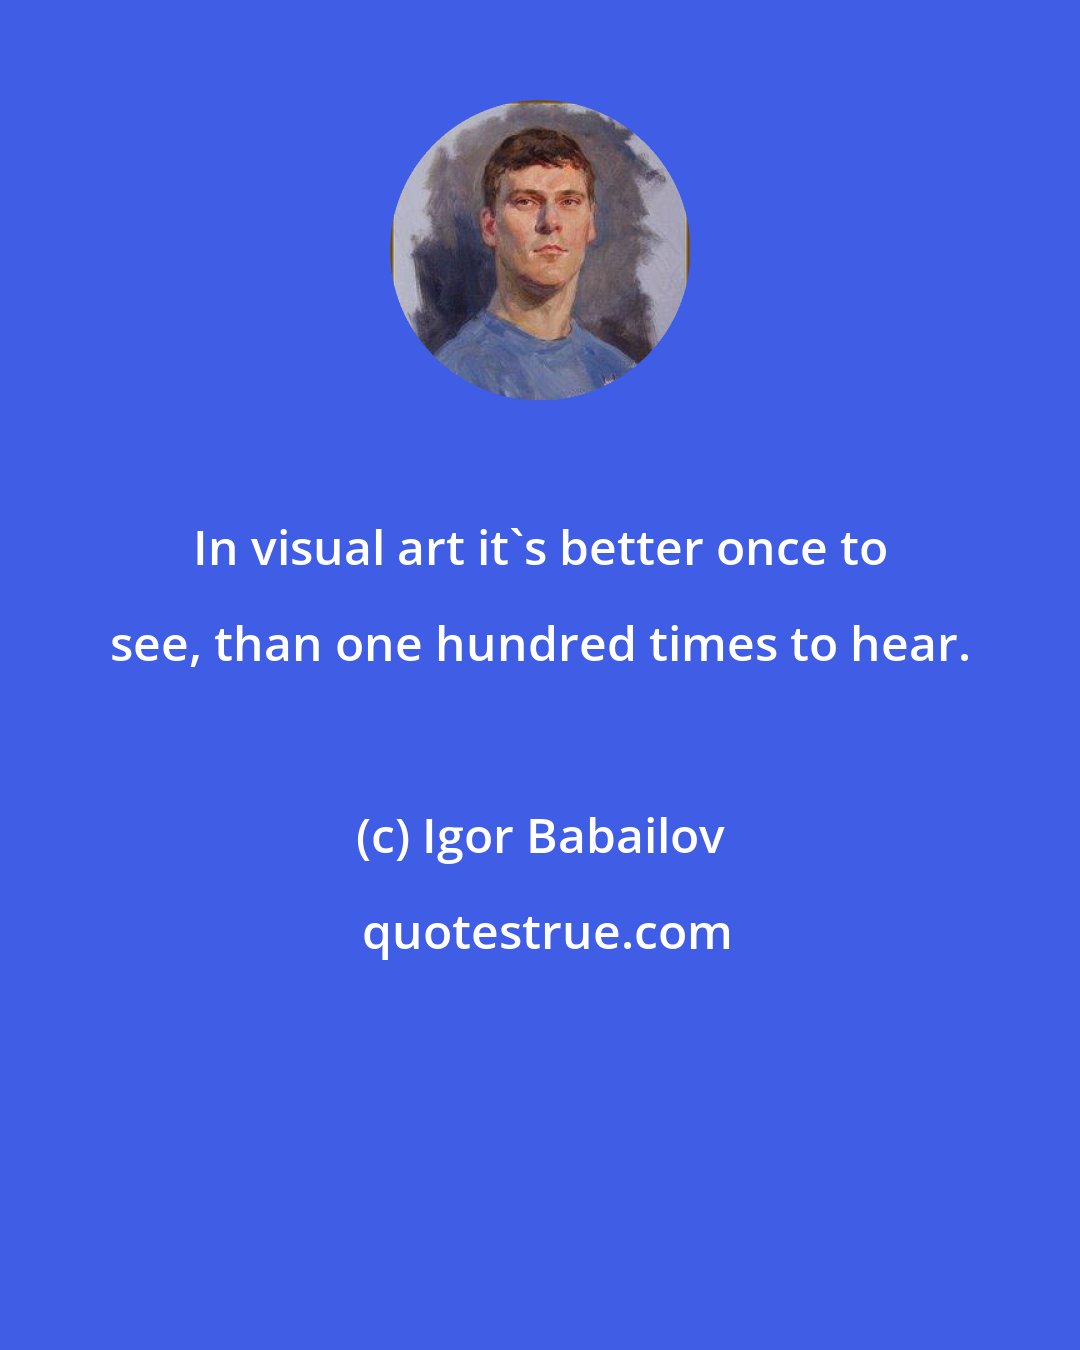 Igor Babailov: In visual art it's better once to see, than one hundred times to hear.